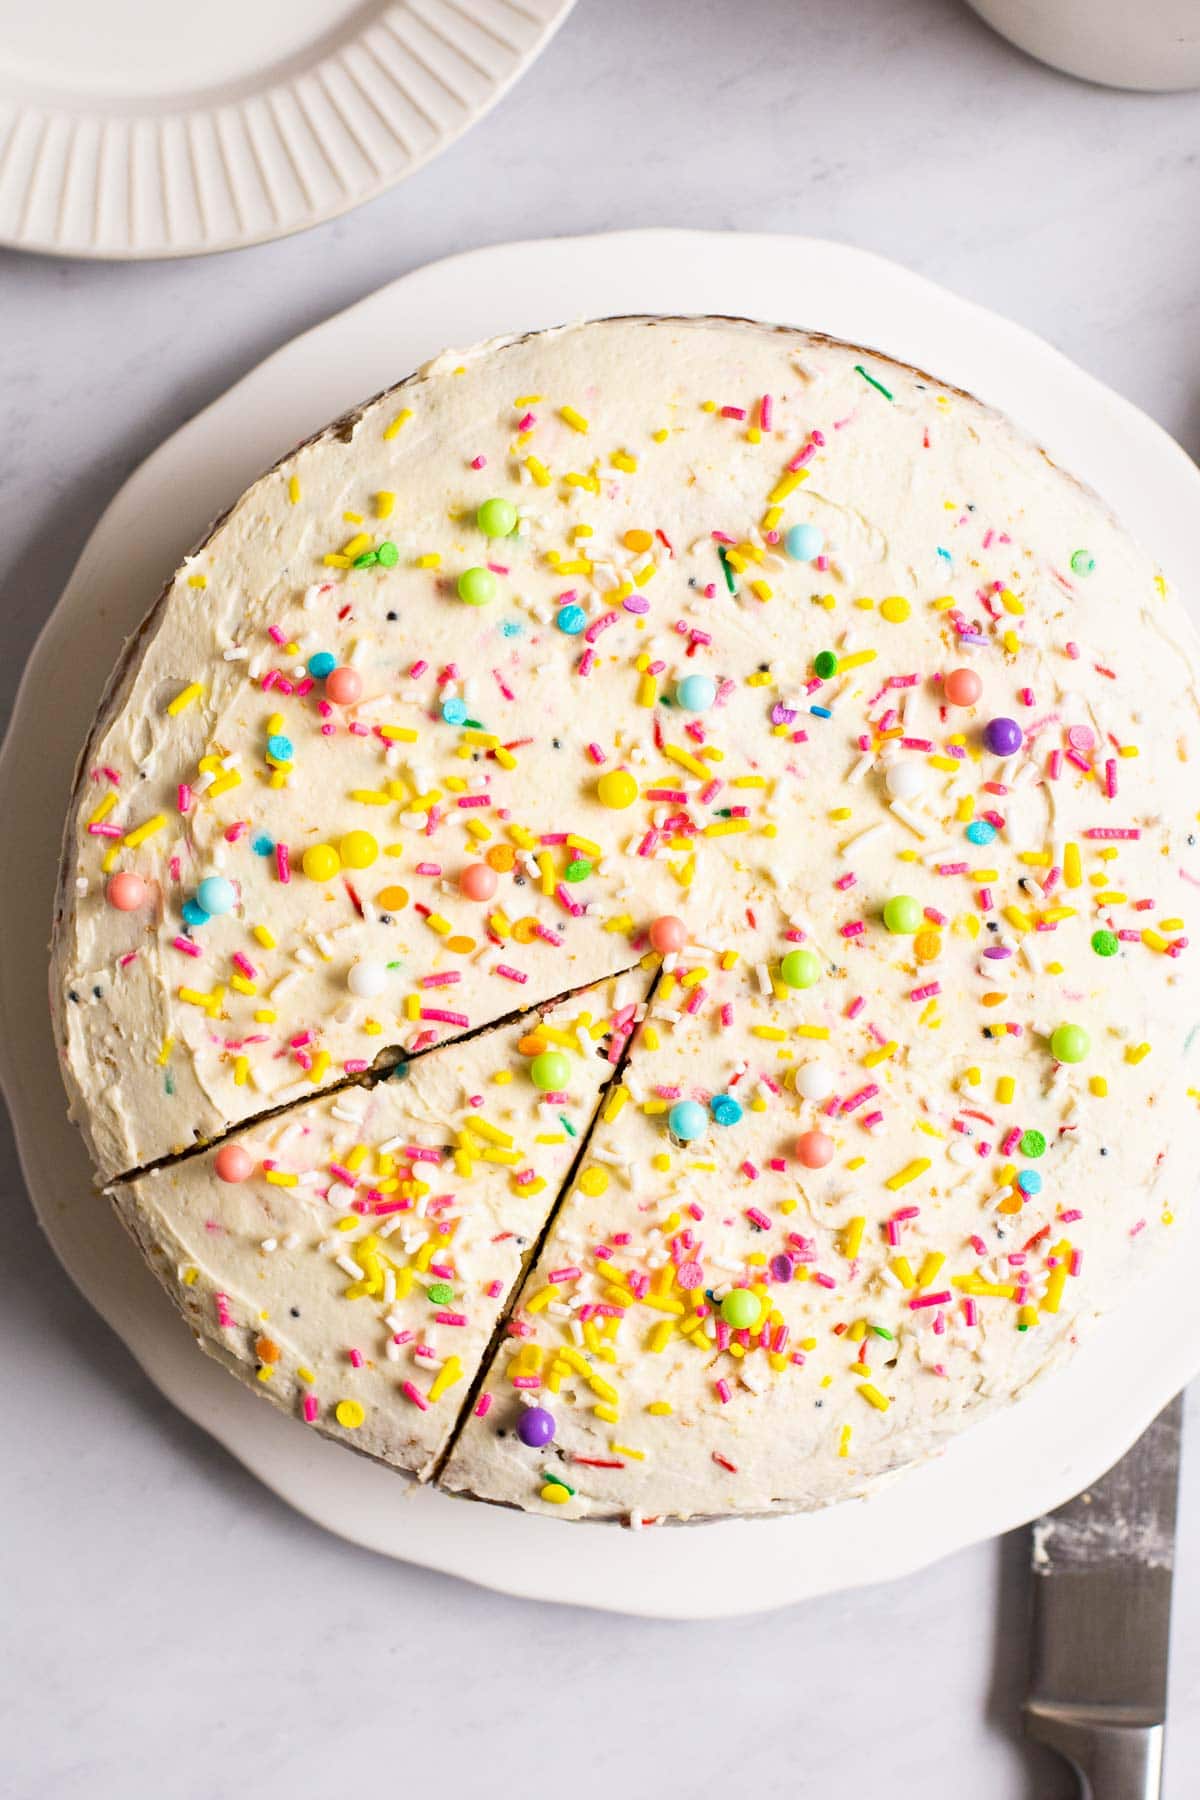 Looking down at a cake with sprinkles that has one piece sliced.